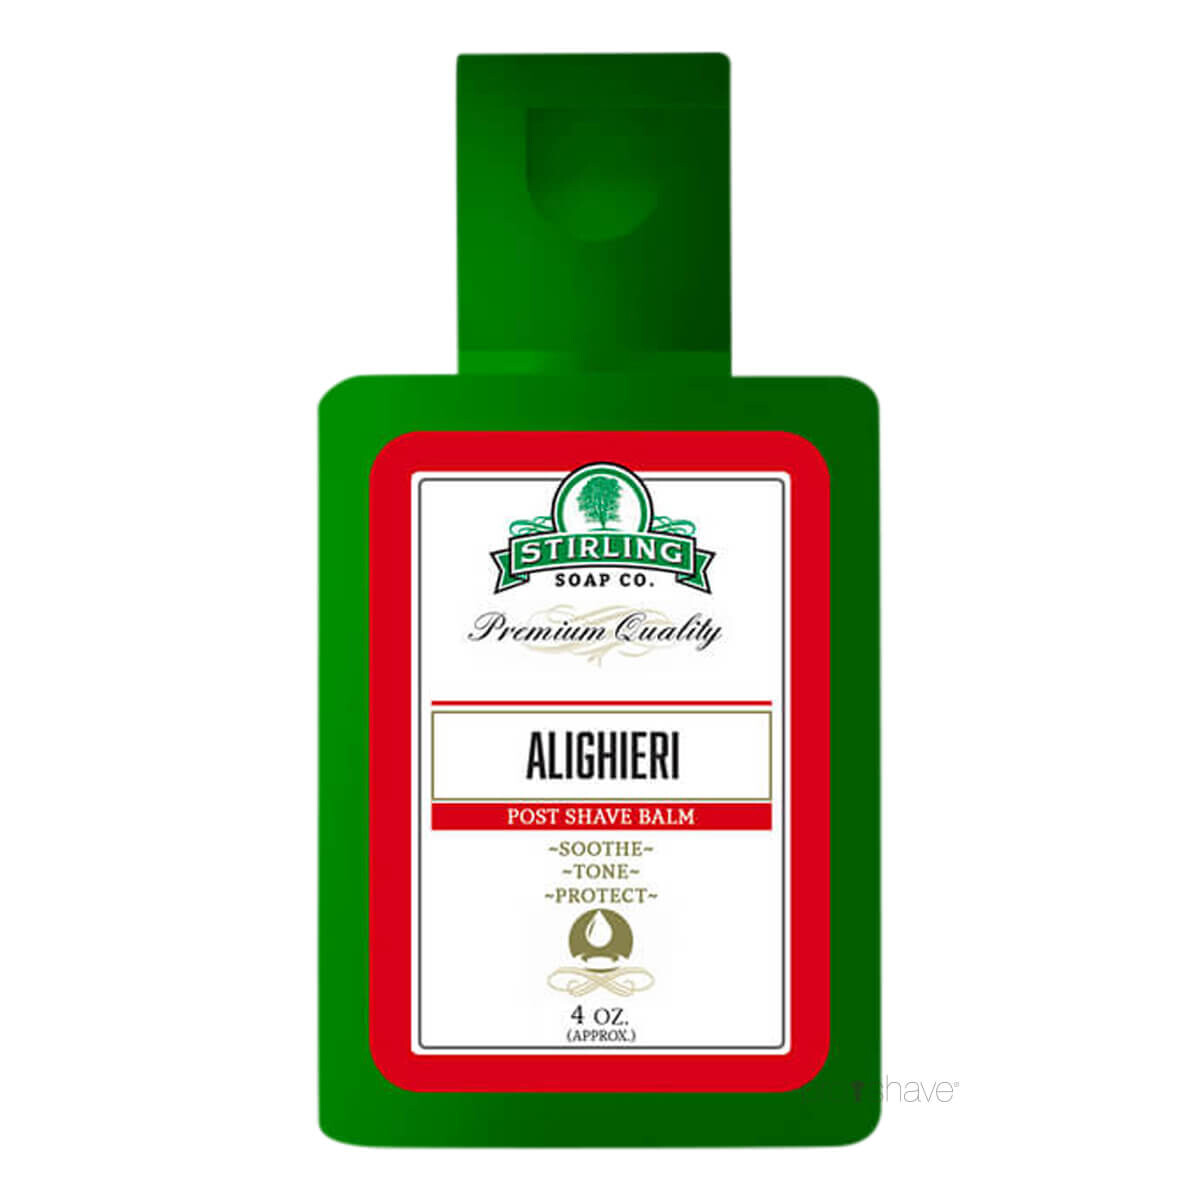 Stirling Soap Co. Aftershave Balm, Alighieri, 118 ml.